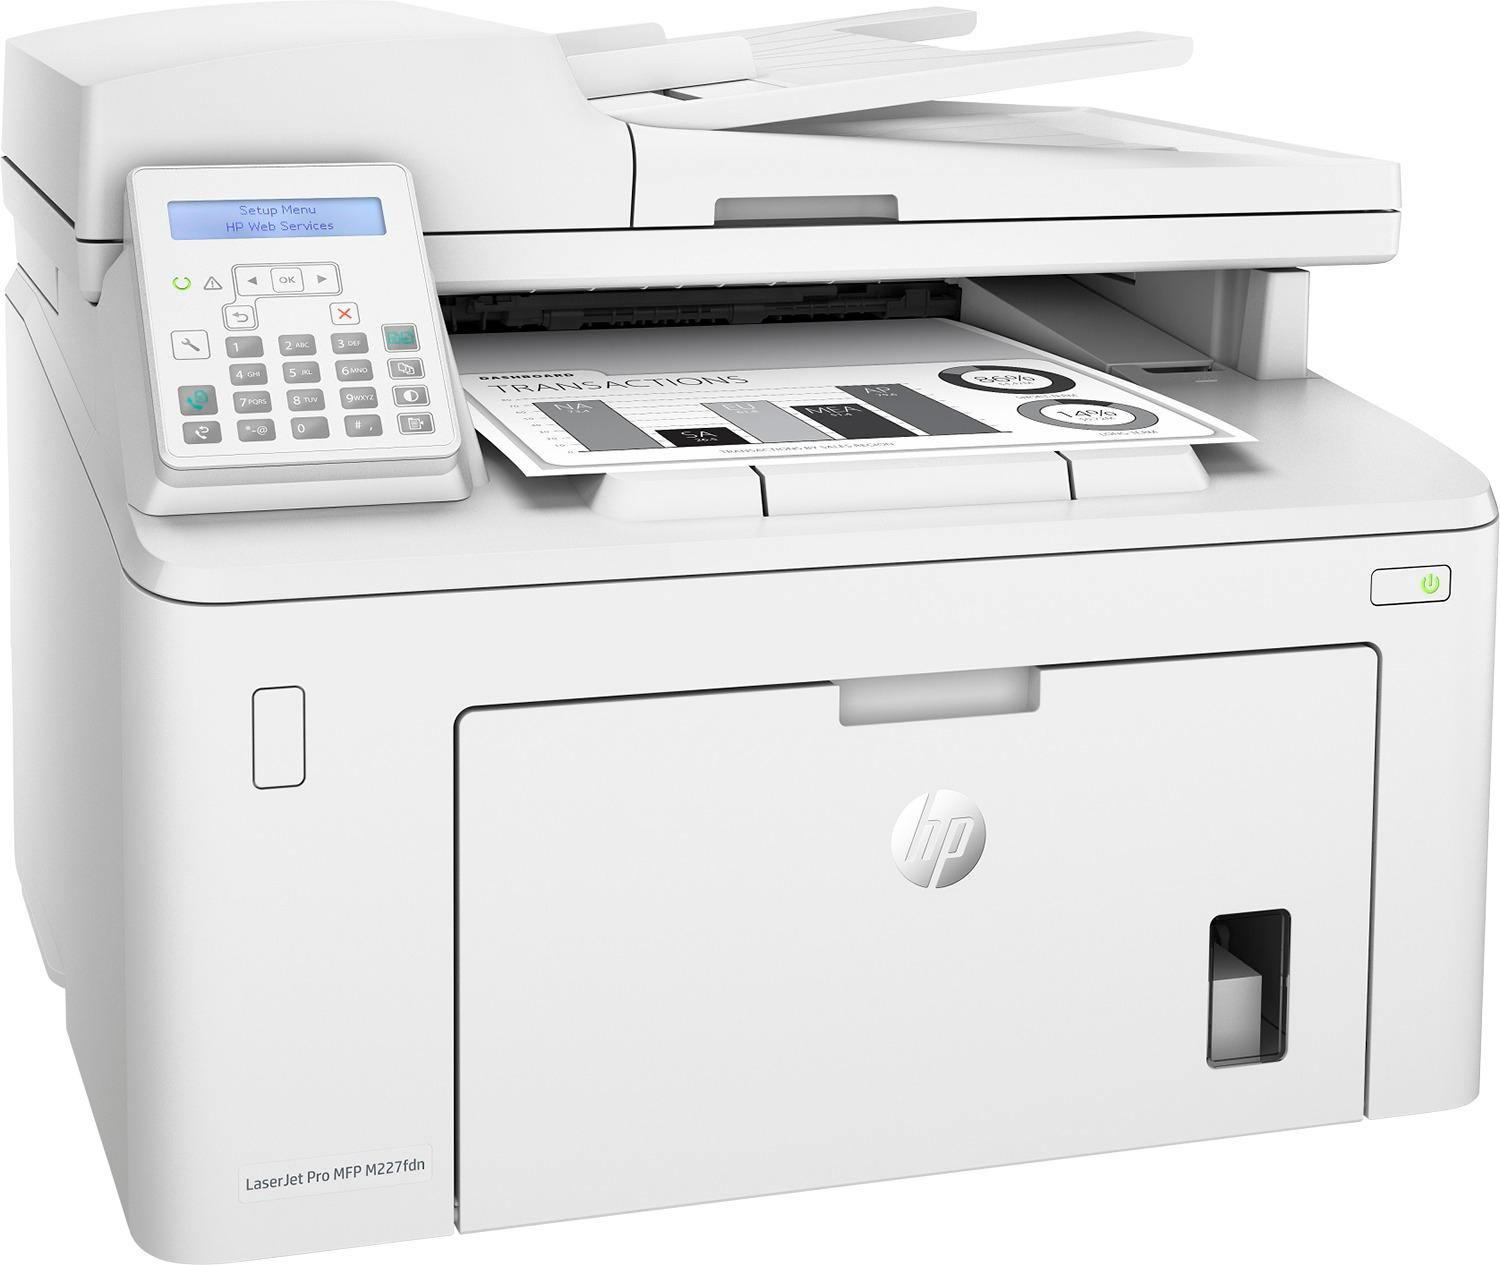 Angle View: HP - LaserJet Pro MFP M227fdn Black-and-White All-In-One Laser Printer - White